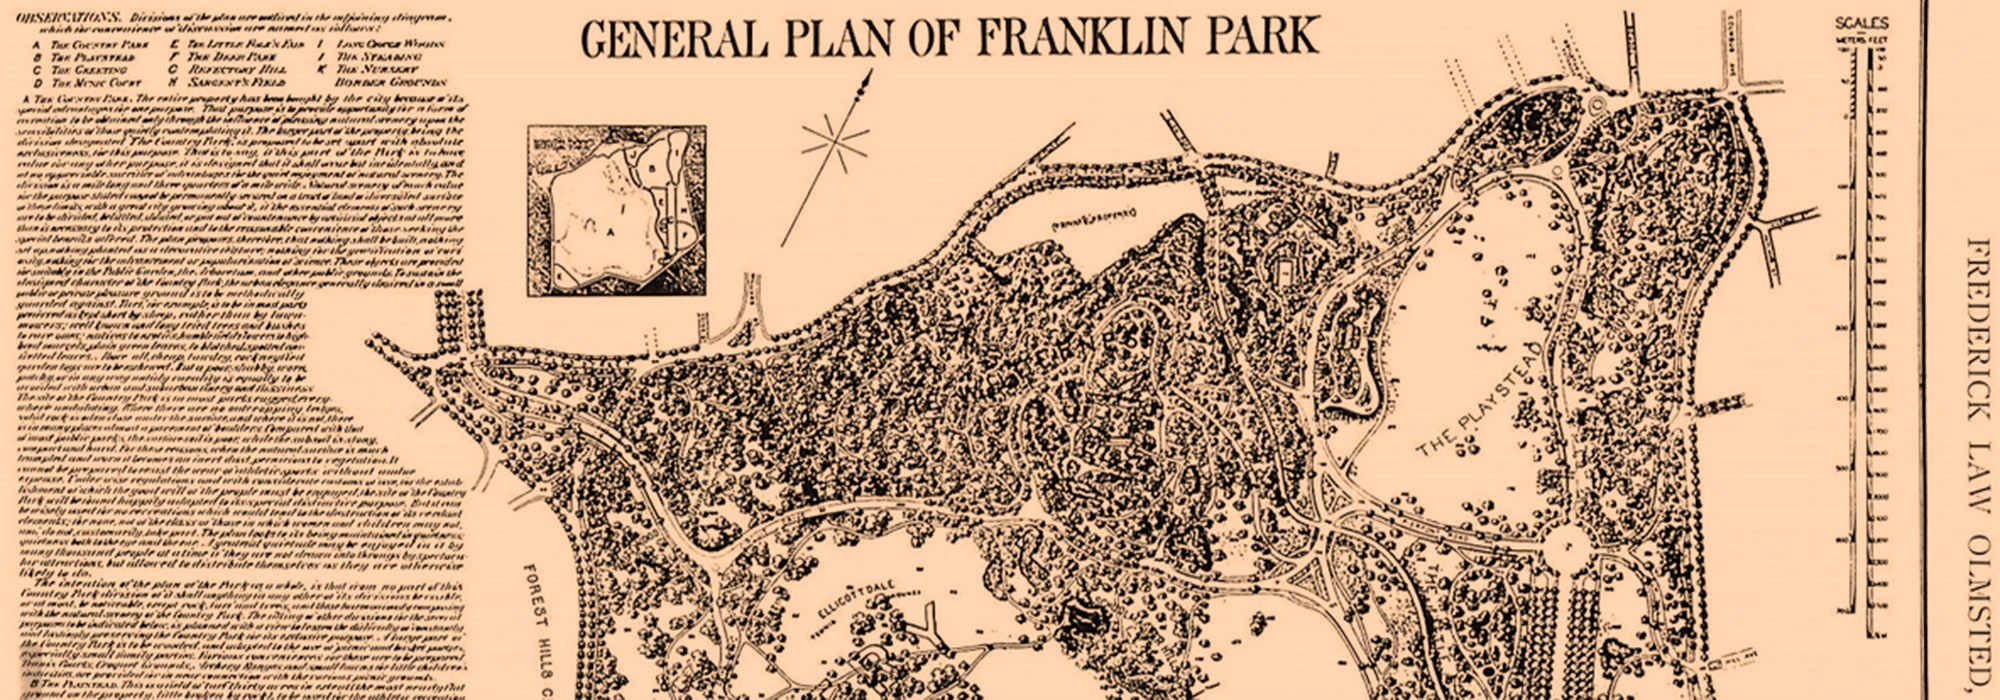 General Plan for Franklin Park, Boston. Included in P.H. Elwood’s seminal folio publication, American Landscape Architecture (1924)